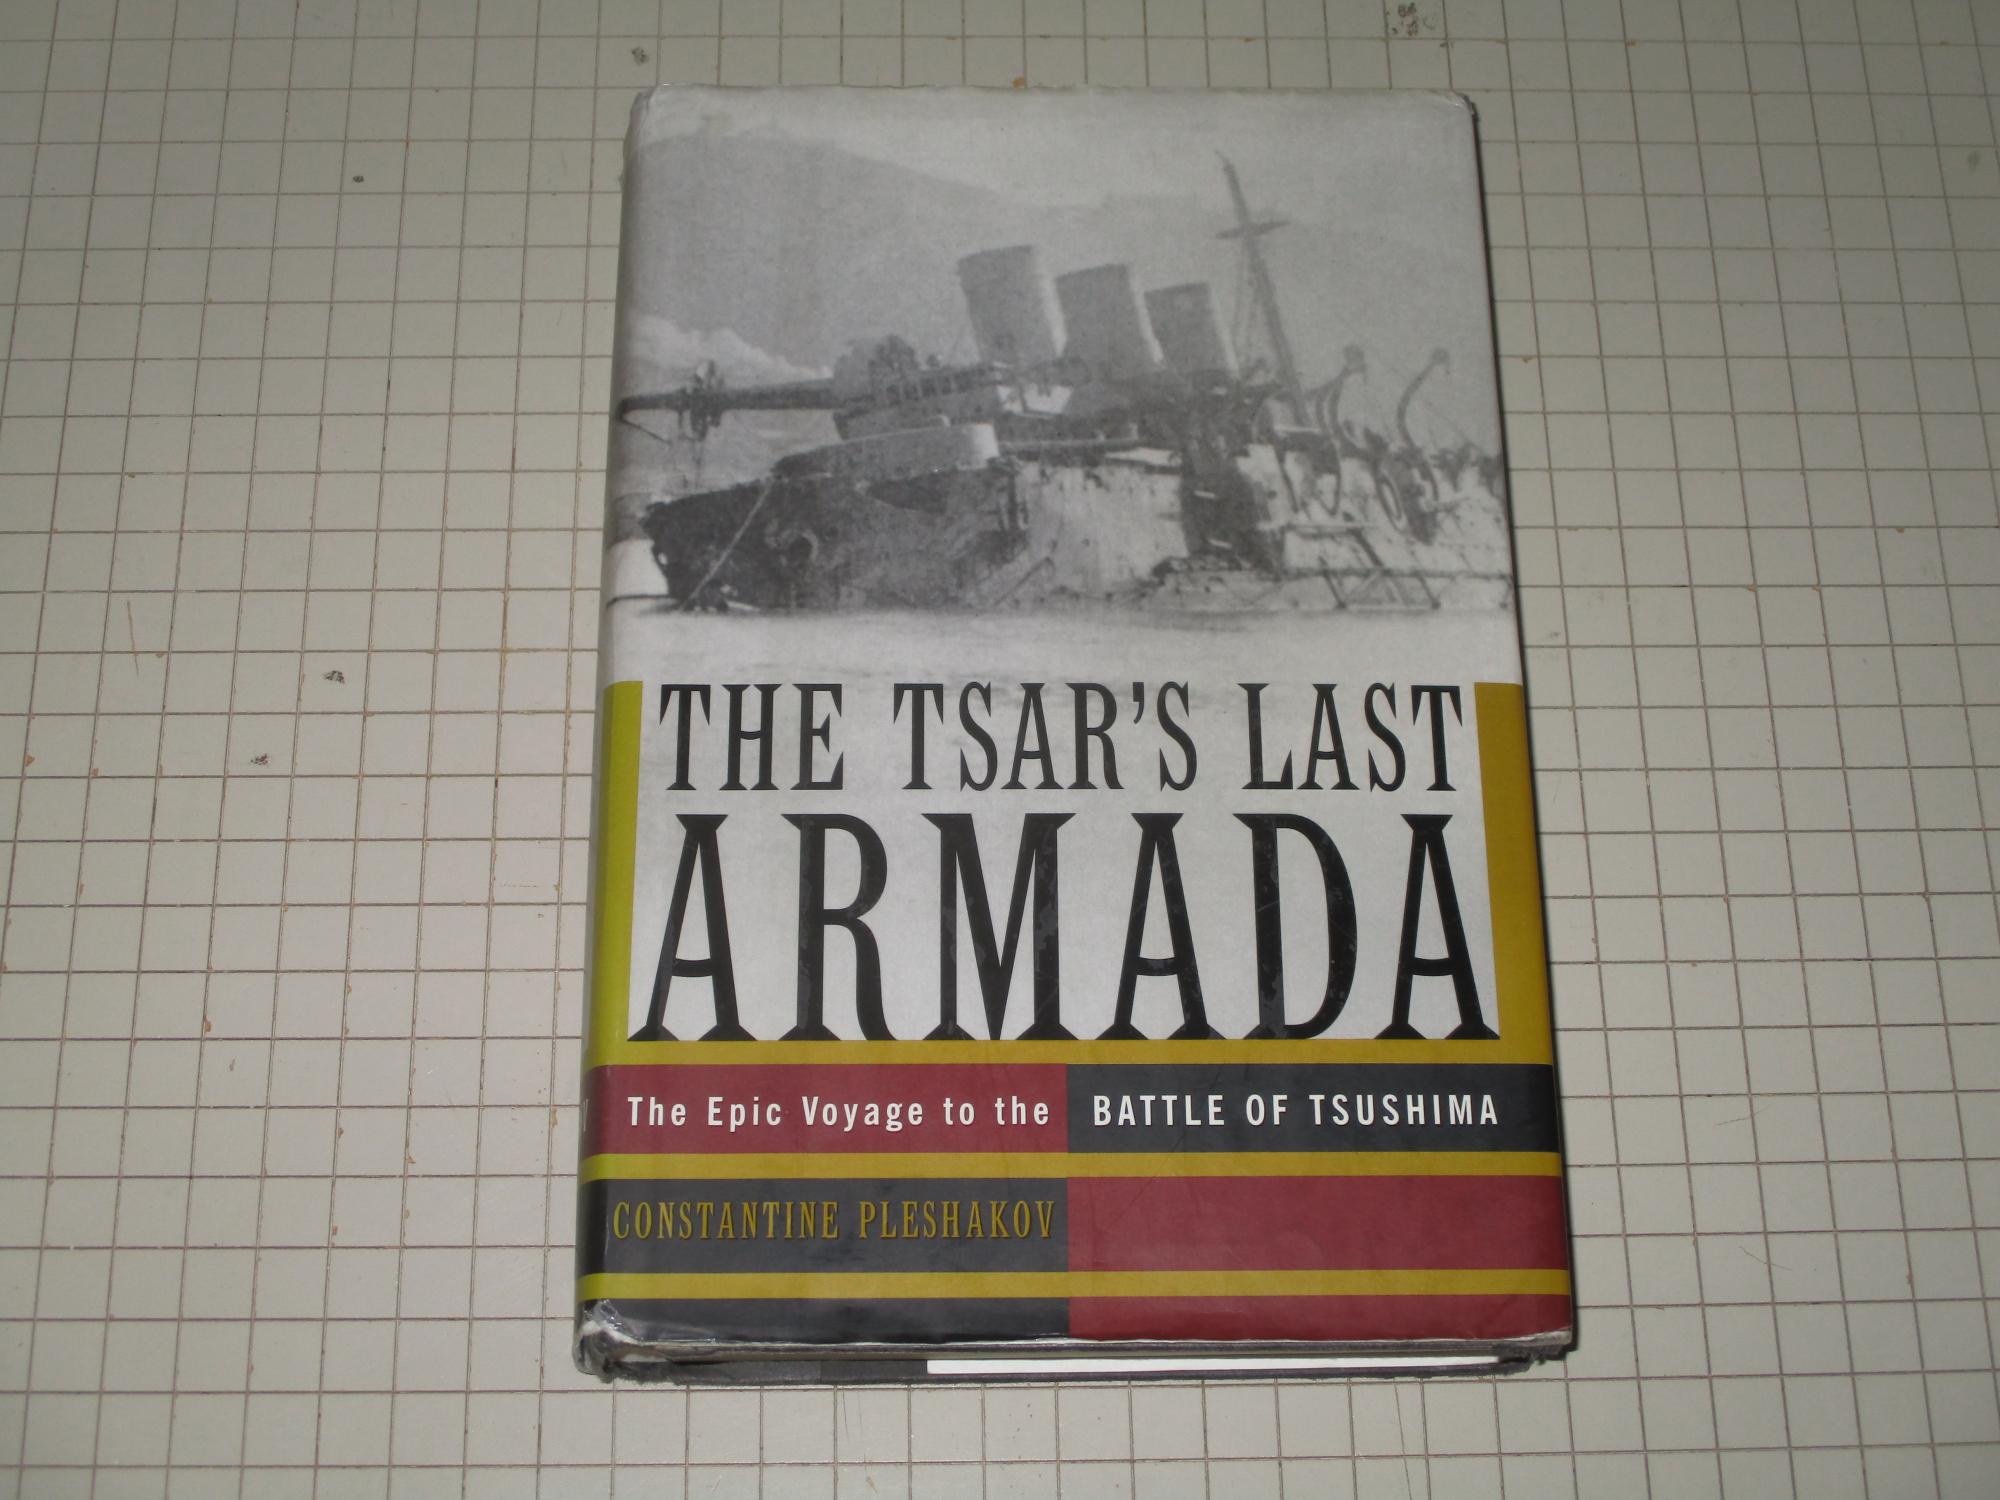 The Tsar's Last Armada: The Epic Voyage to the Battle of Tsushima